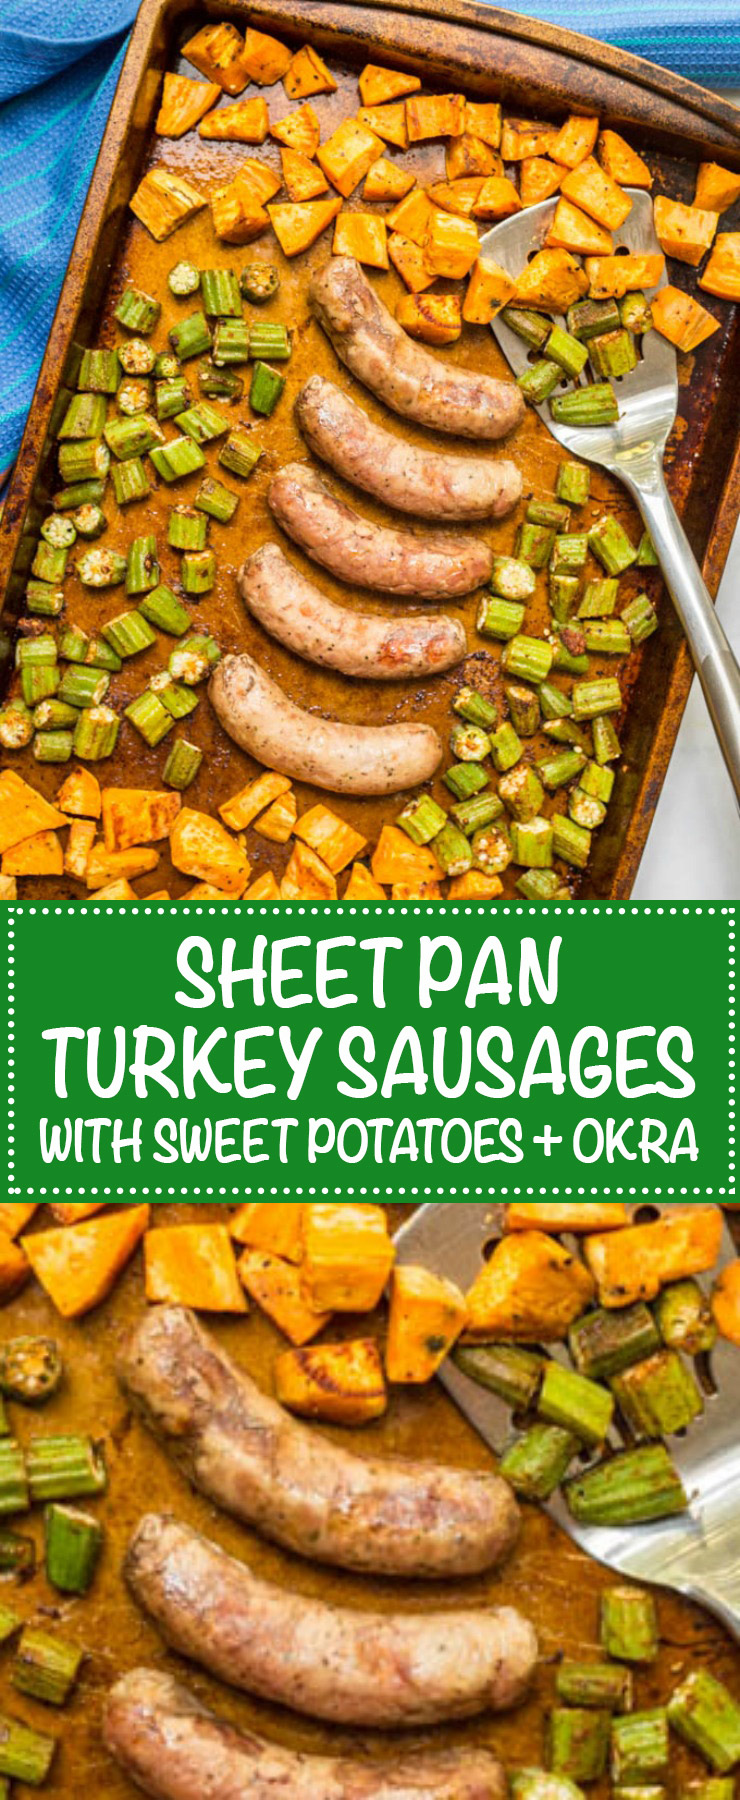 Sheet pan turkey sausages with sweet potatoes and okra is an easy, hands-off dinner that’s perfect for a busy weeknight! | www.familyfoodonthetable.com